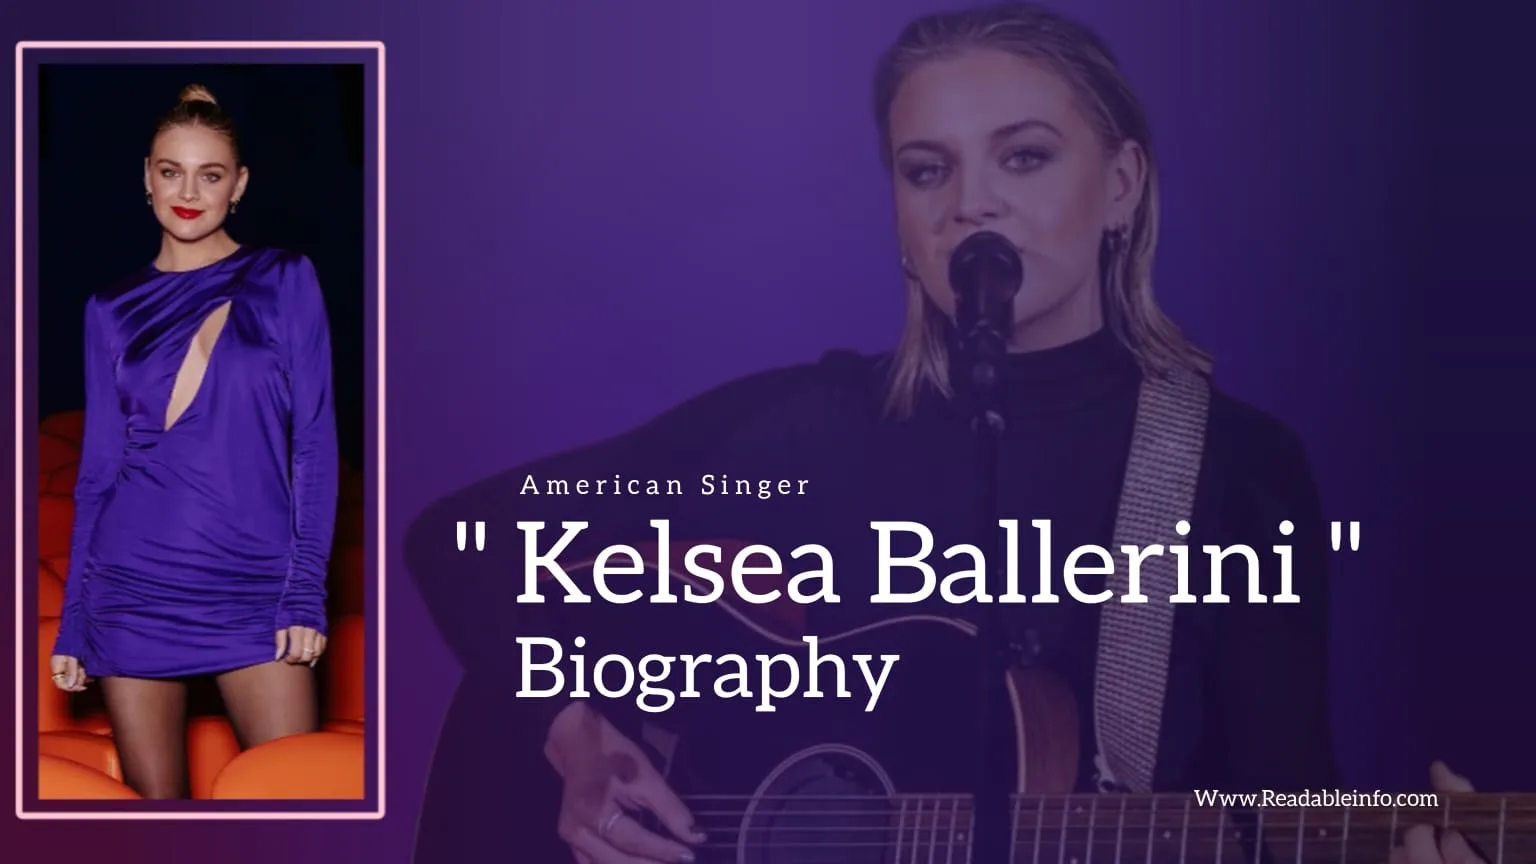 You are currently viewing Kelsea Ballerini Biography (American Singer)